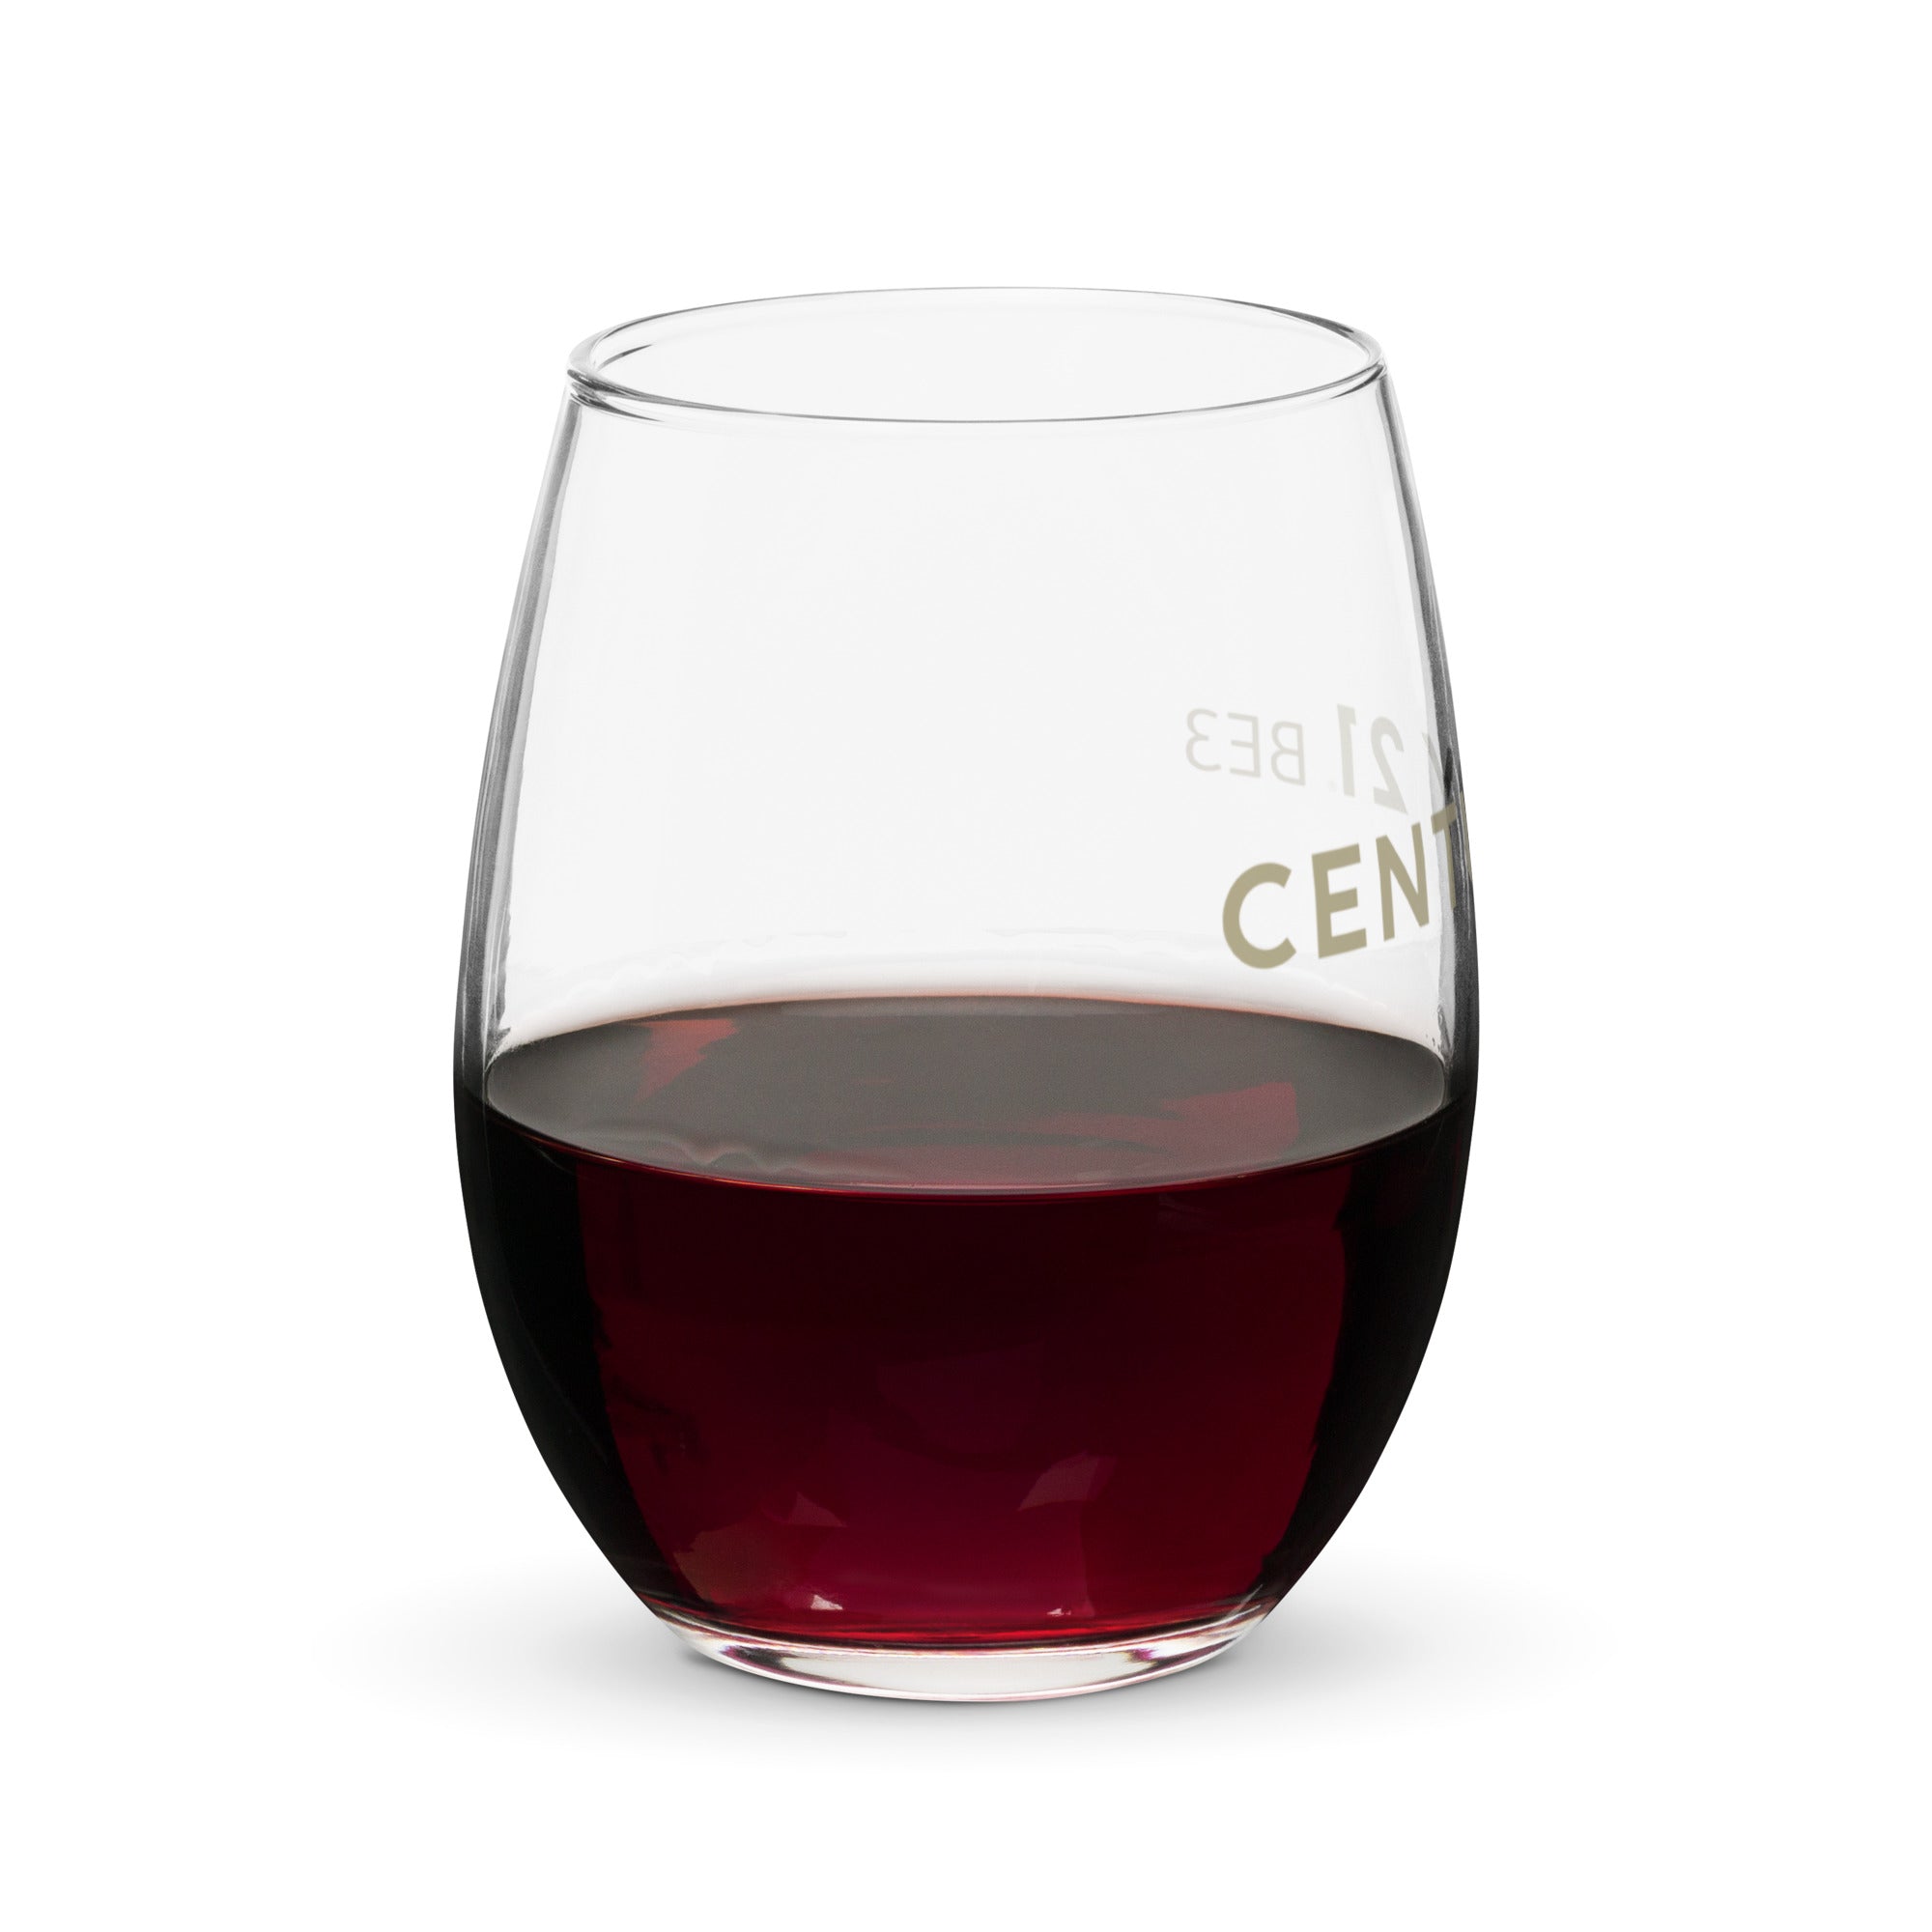 BE3 Word Seal Stemless wine glass